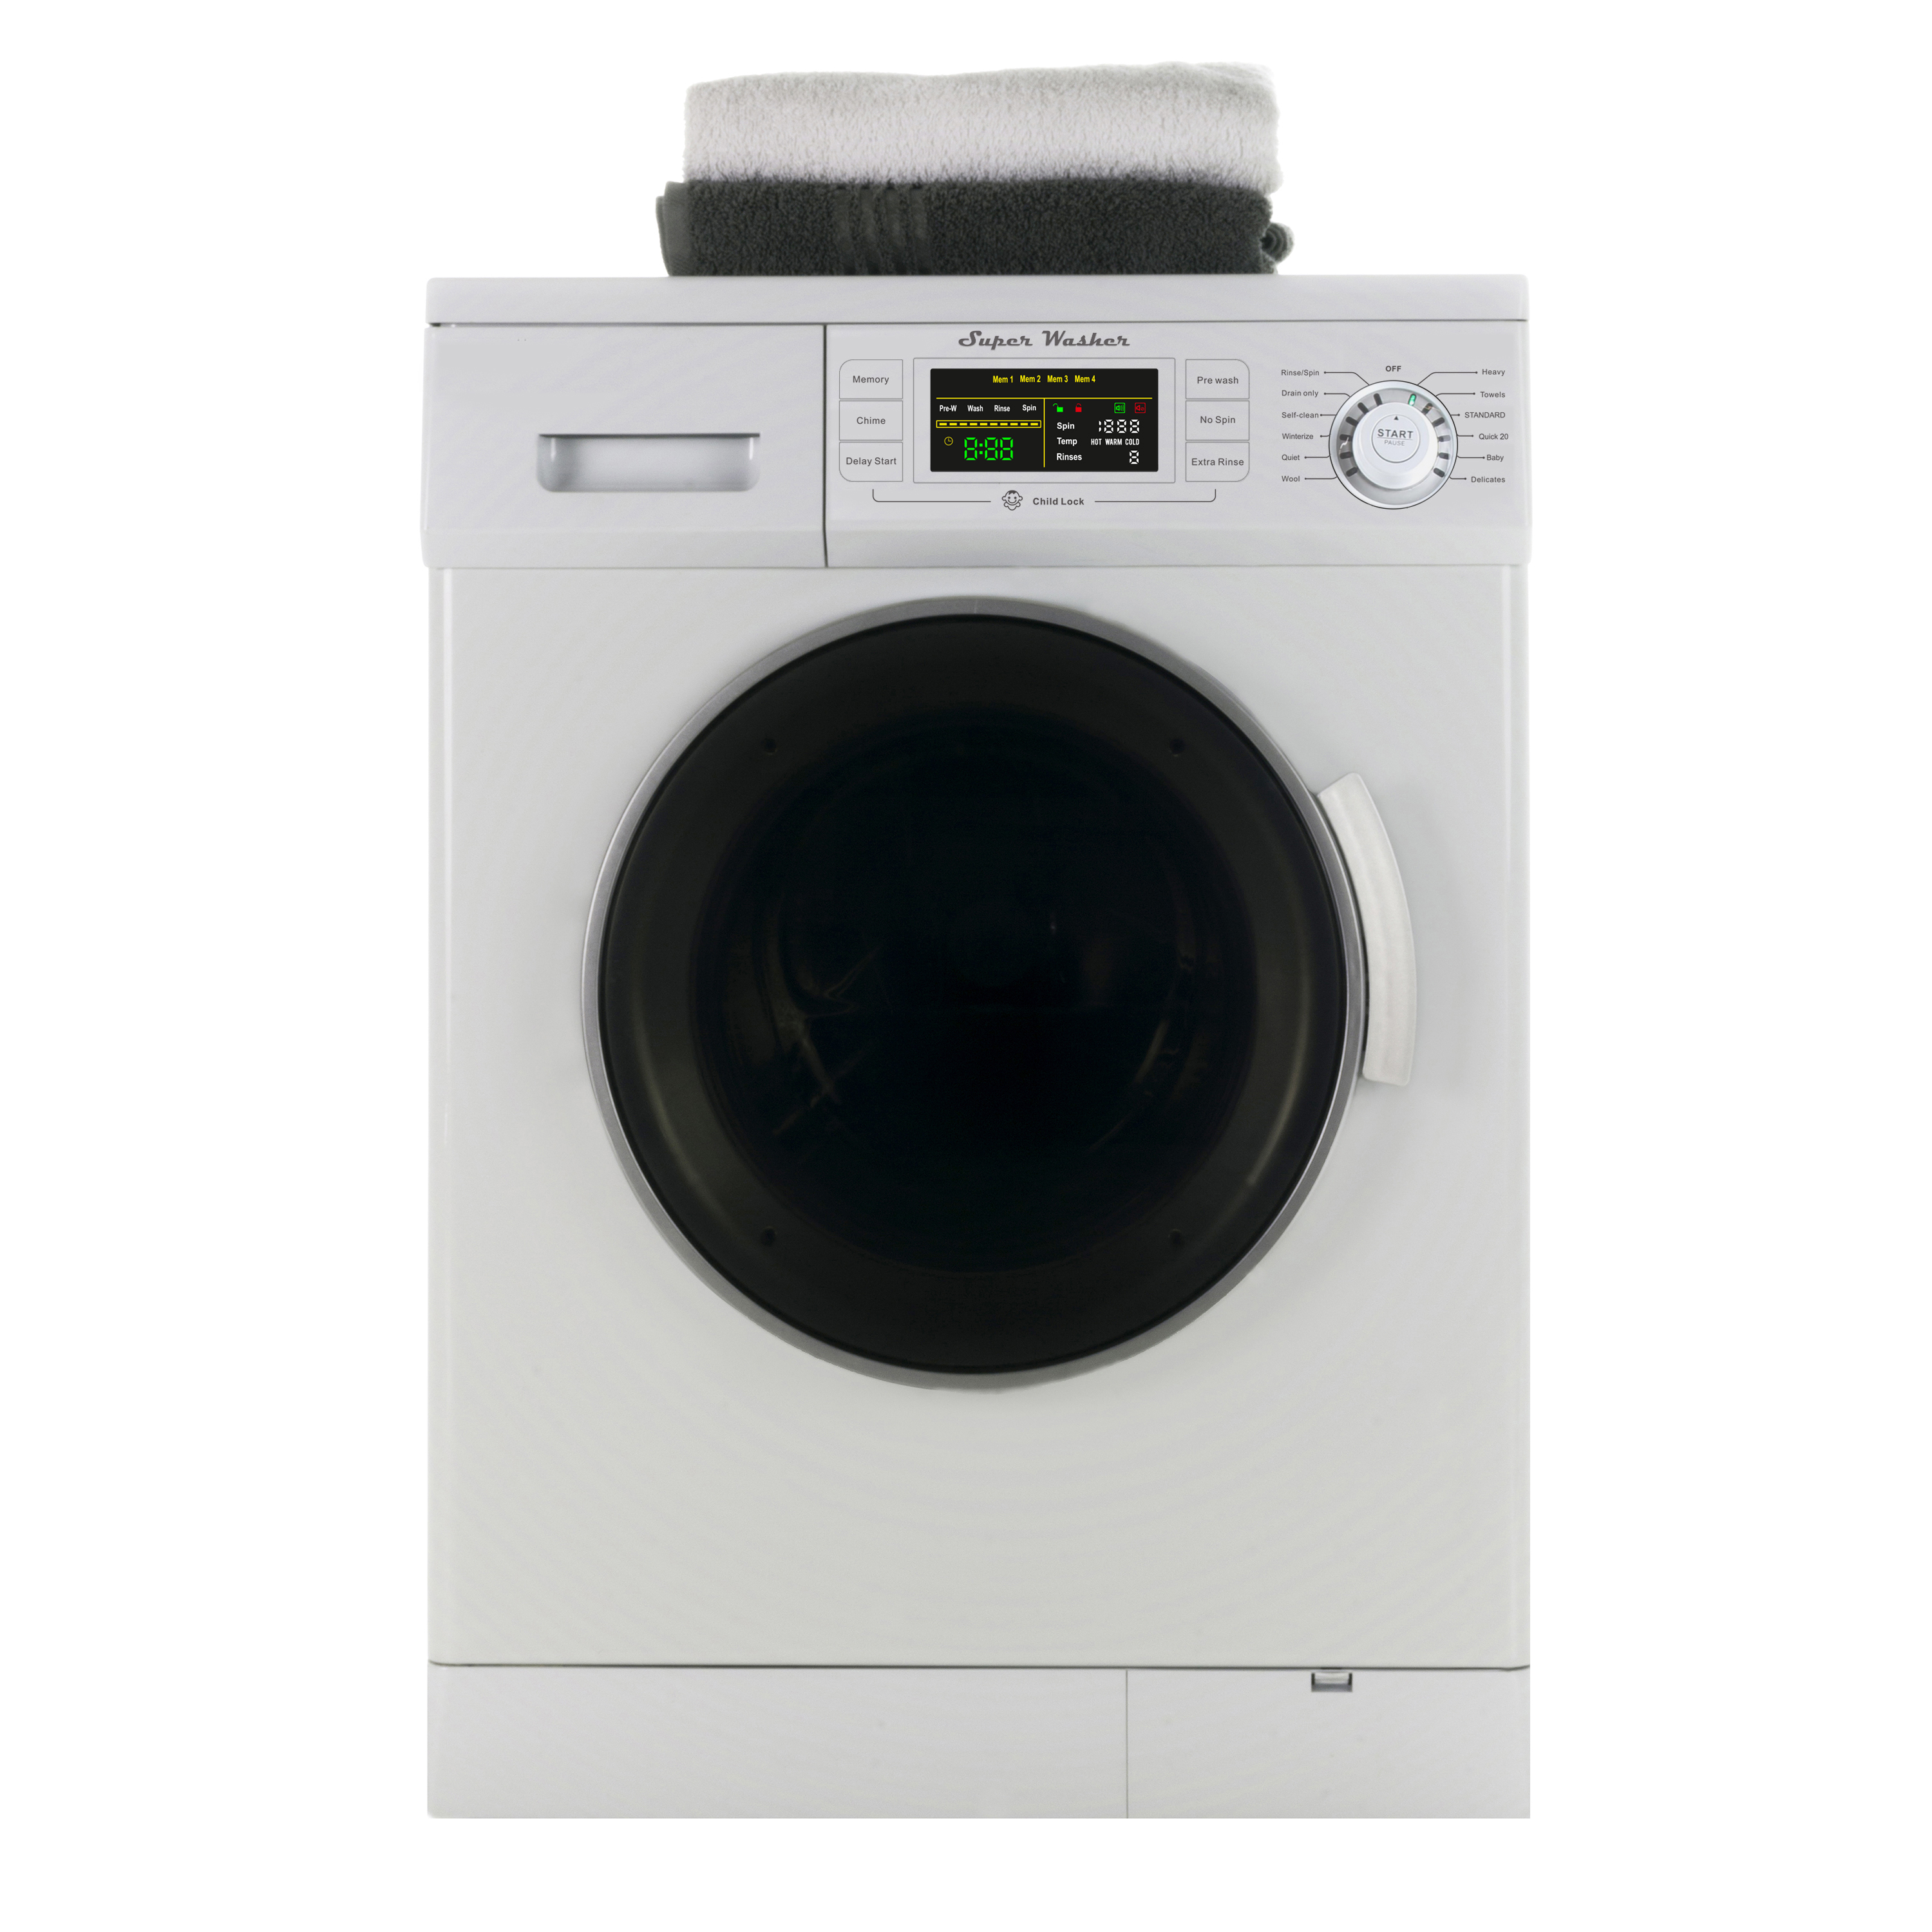 Conserv Washer CW 824